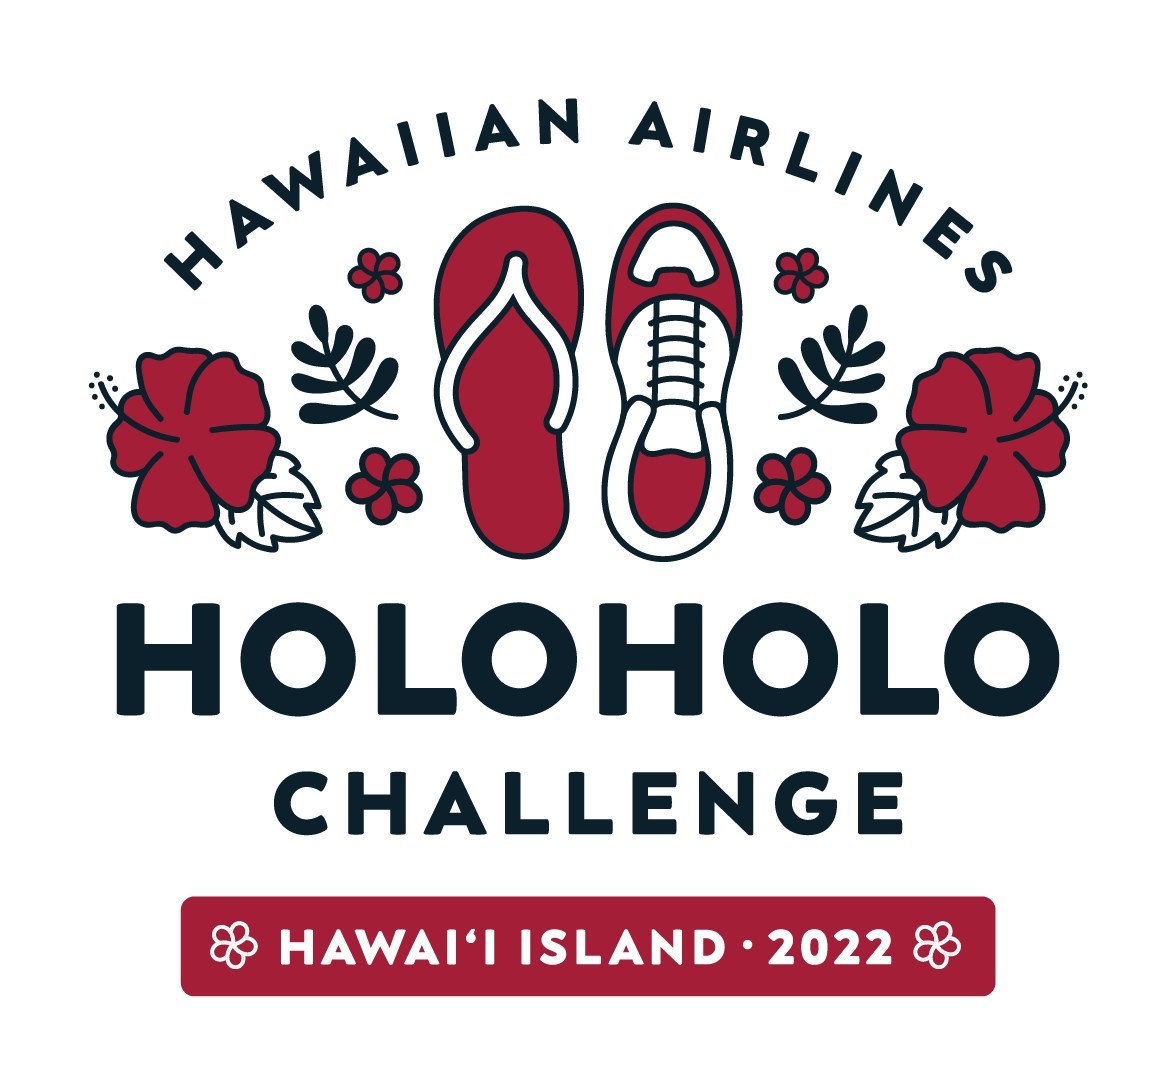 Start Stretching! Hawaiian Airlines Debuts Its Third Annual Holoholo